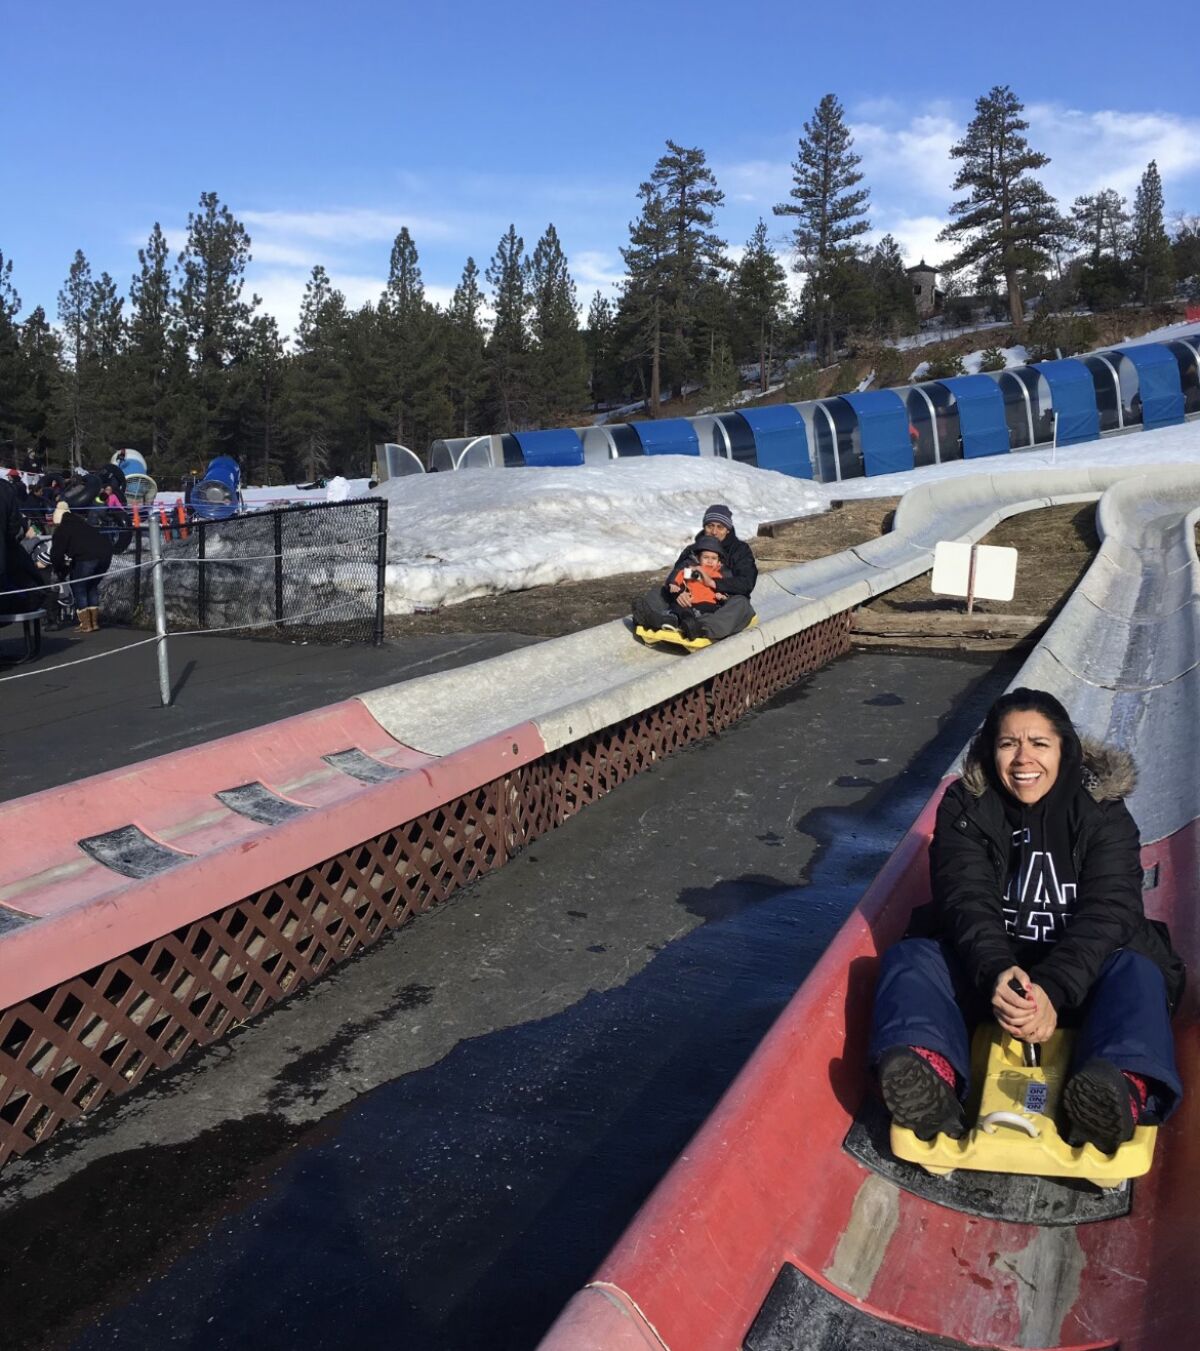 A woman on a sled in a track